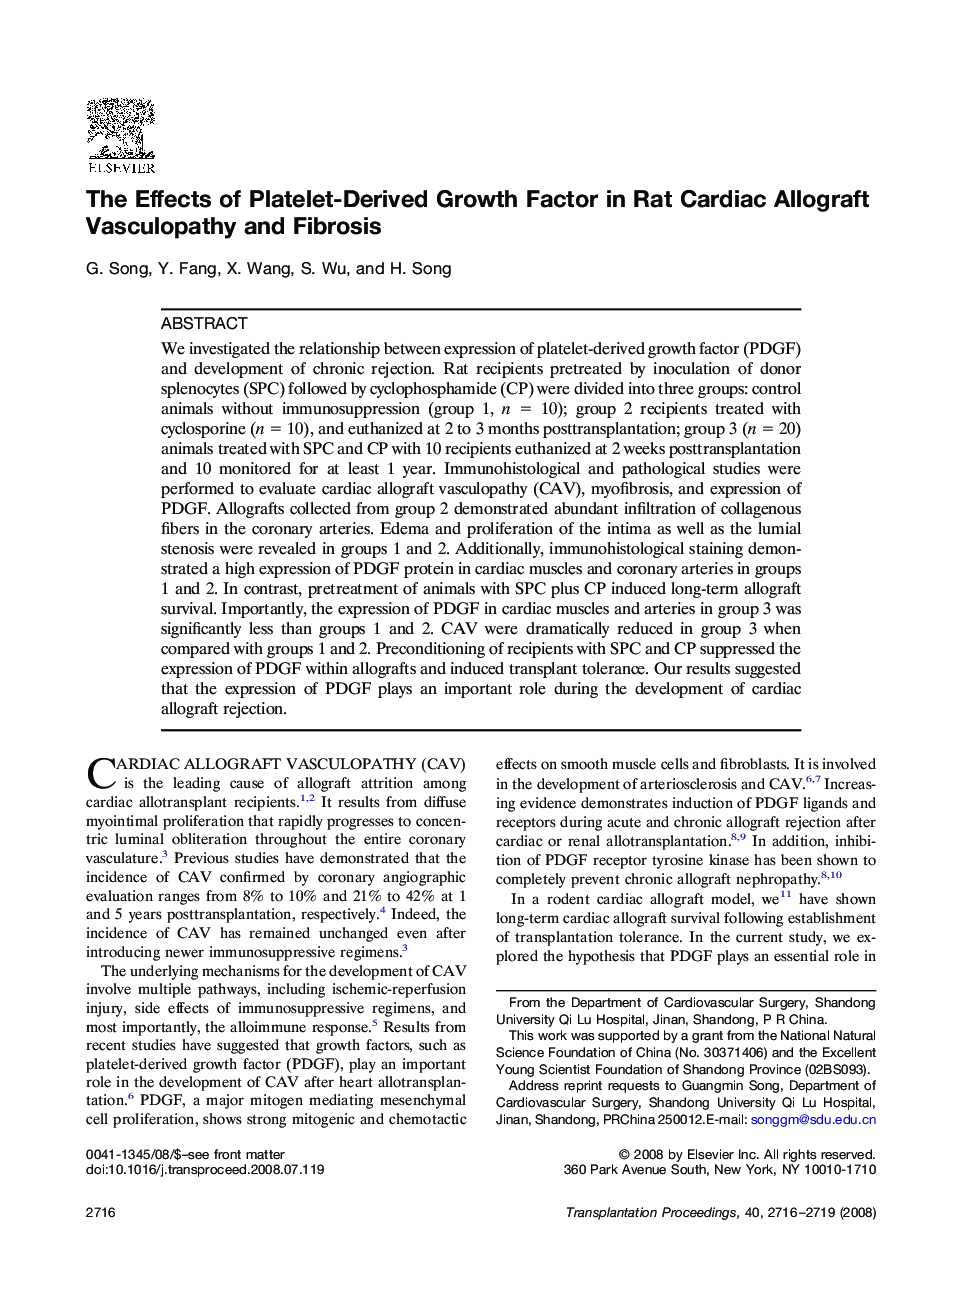 The Effects of Platelet-Derived Growth Factor in Rat Cardiac Allograft Vasculopathy and Fibrosis 